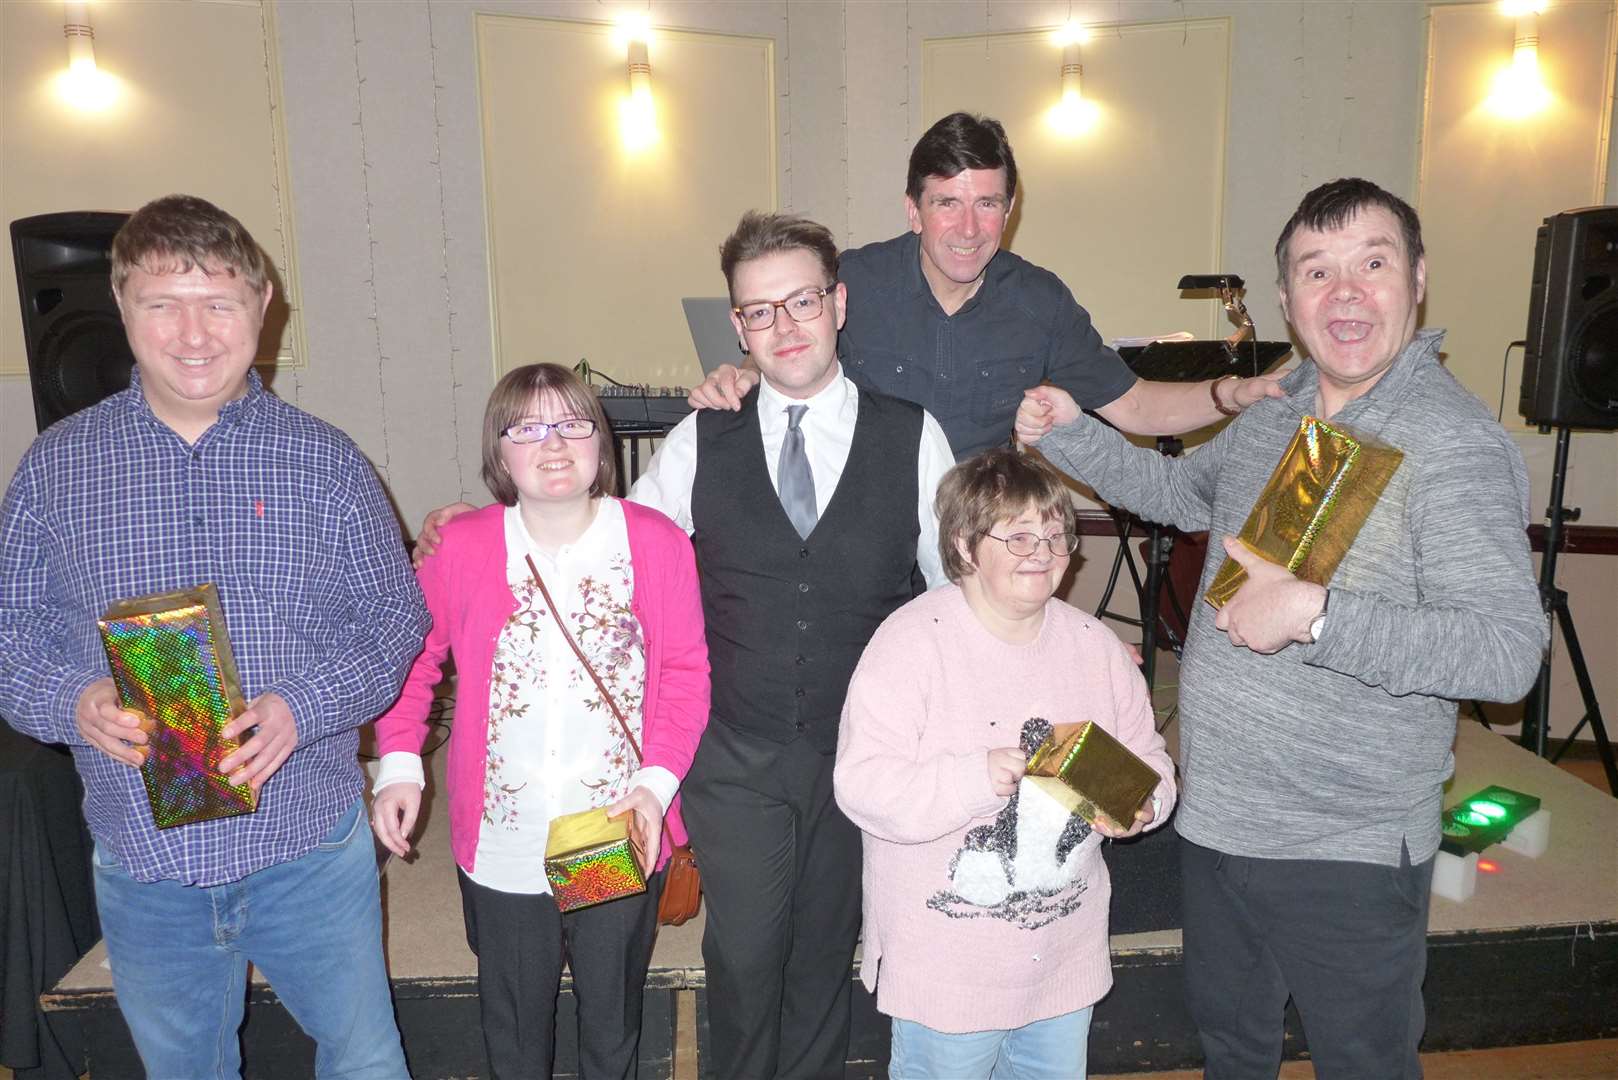 Craig Mathieson (centre) hands over prizes to the lucky spot-dance winners of the afternoon (from left), Christopher Nichol, Charlene Wilkinson, Eileen Crocket and Ronald Harris, with musician Colin McFeat looking on. Pictures: Willie Mackay